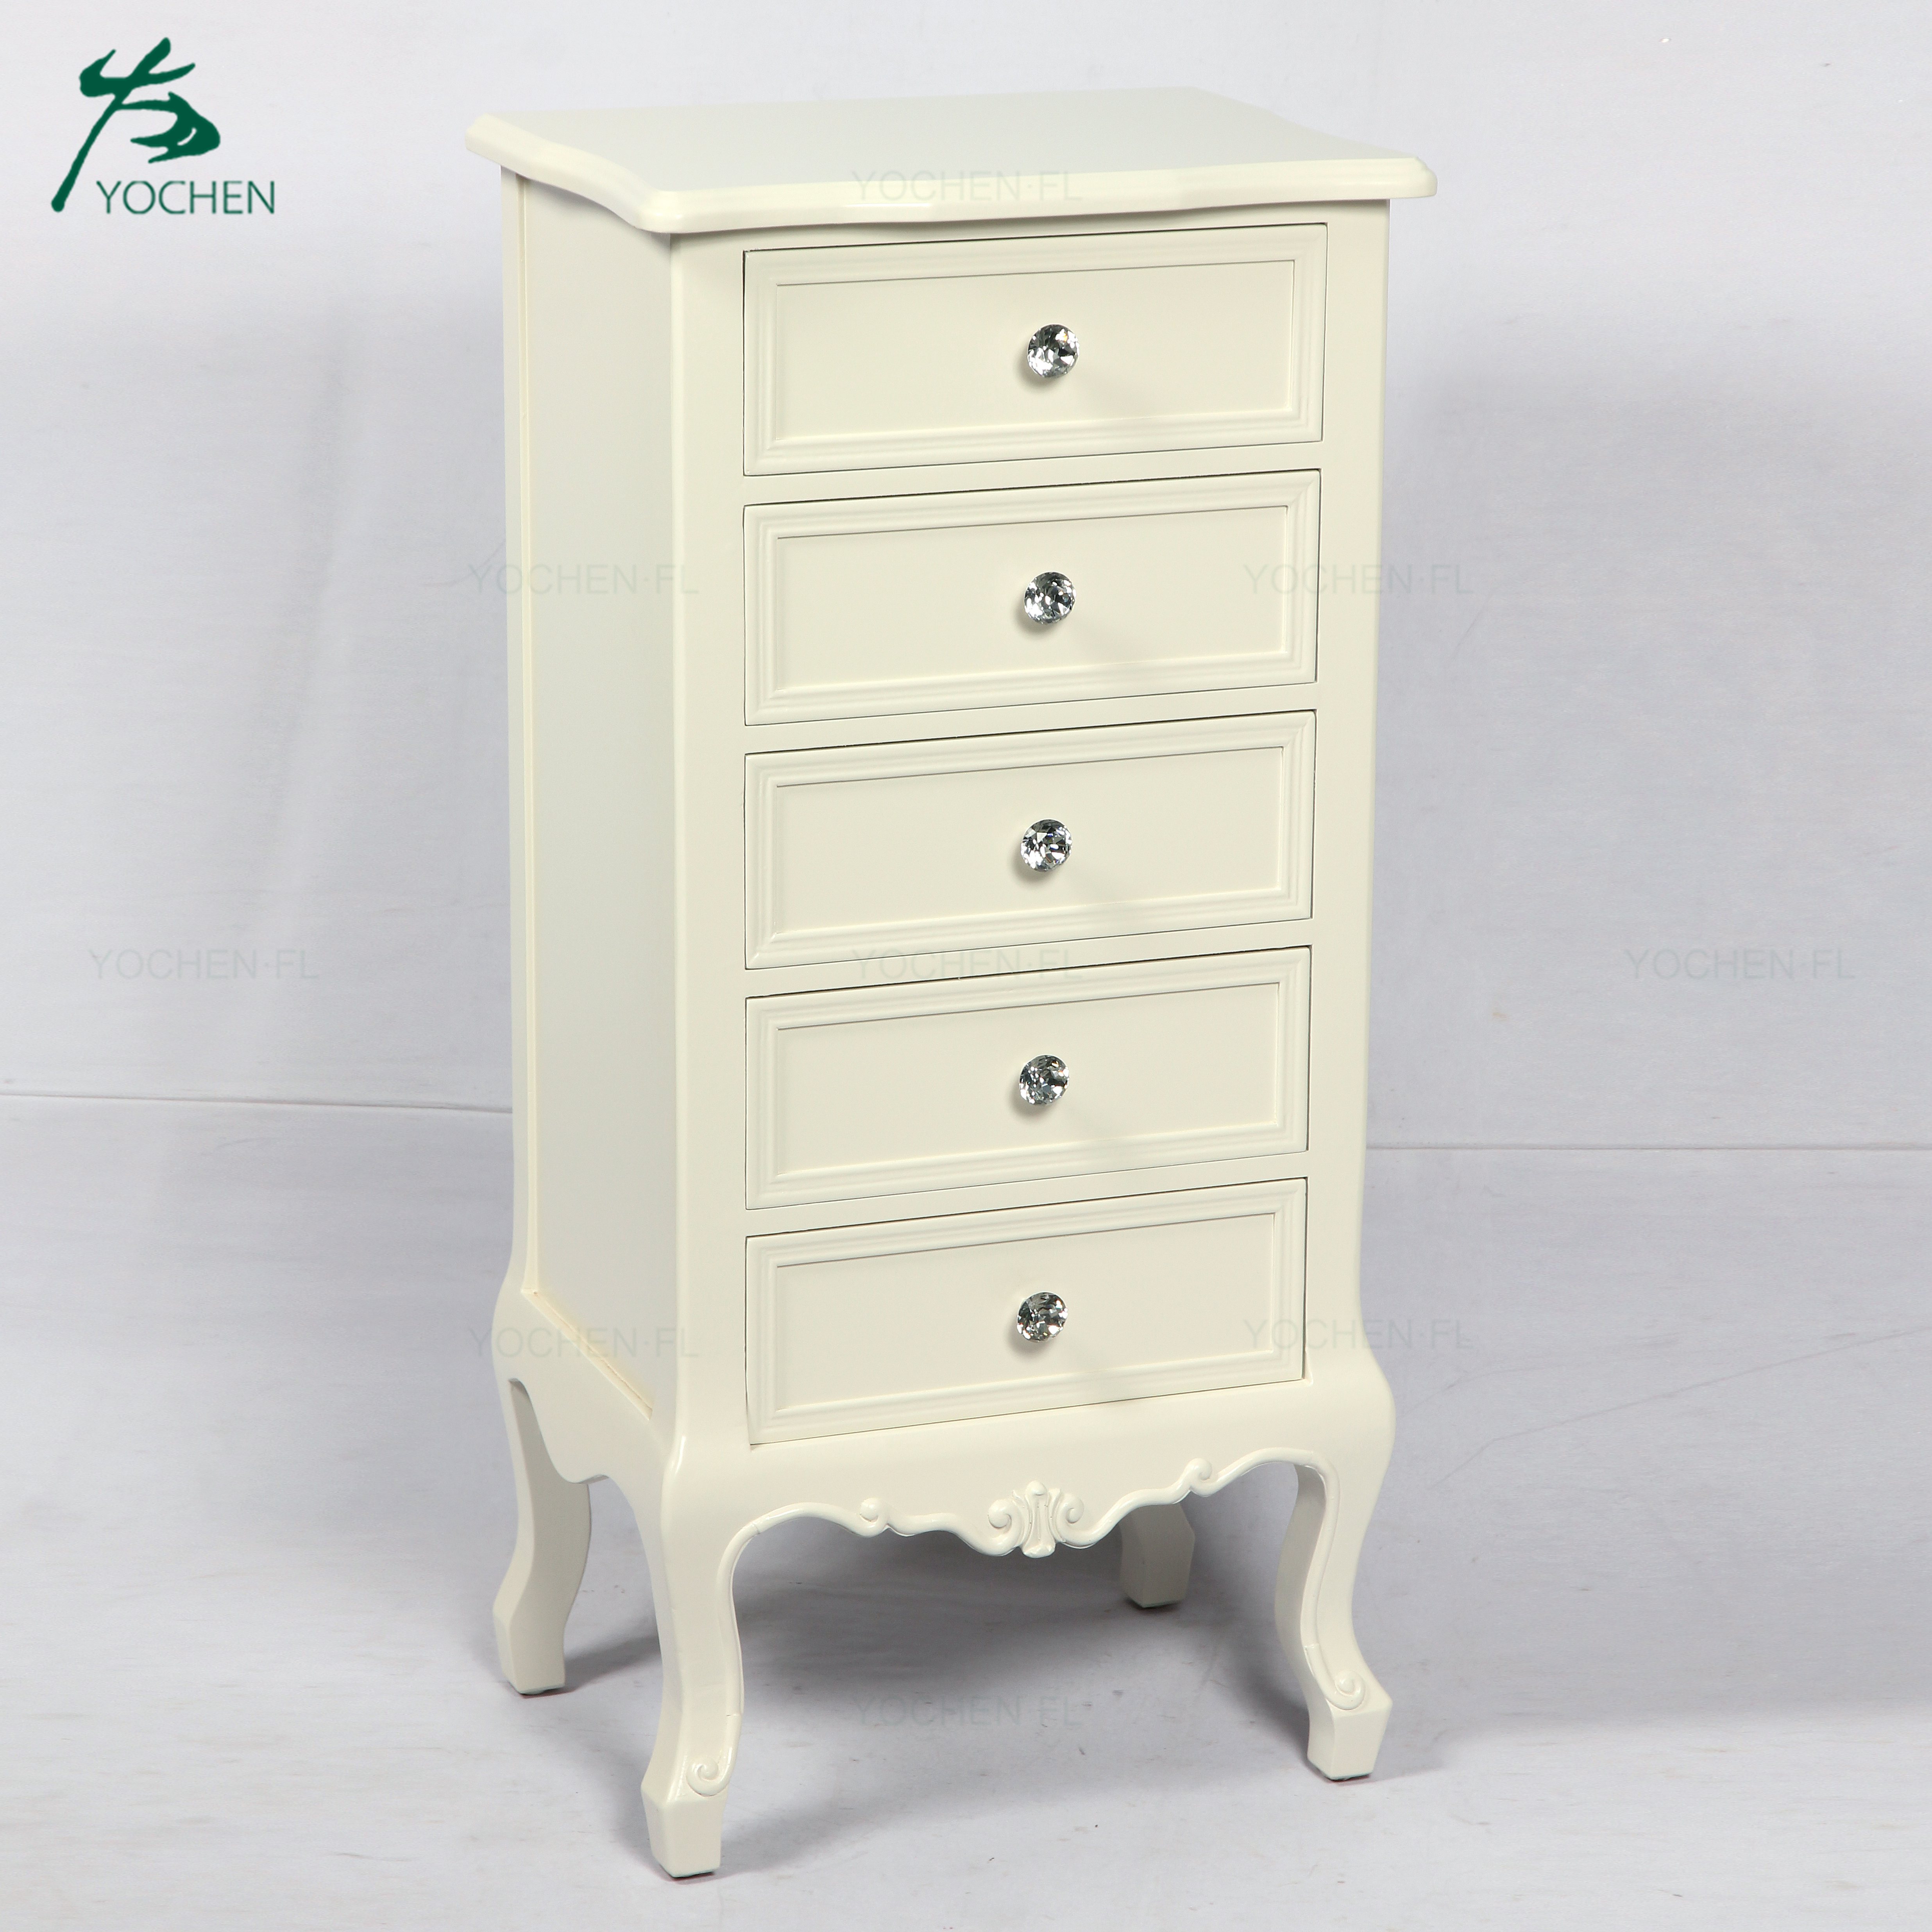 white furniture antiqued wood storage cabinet with colorful drawer